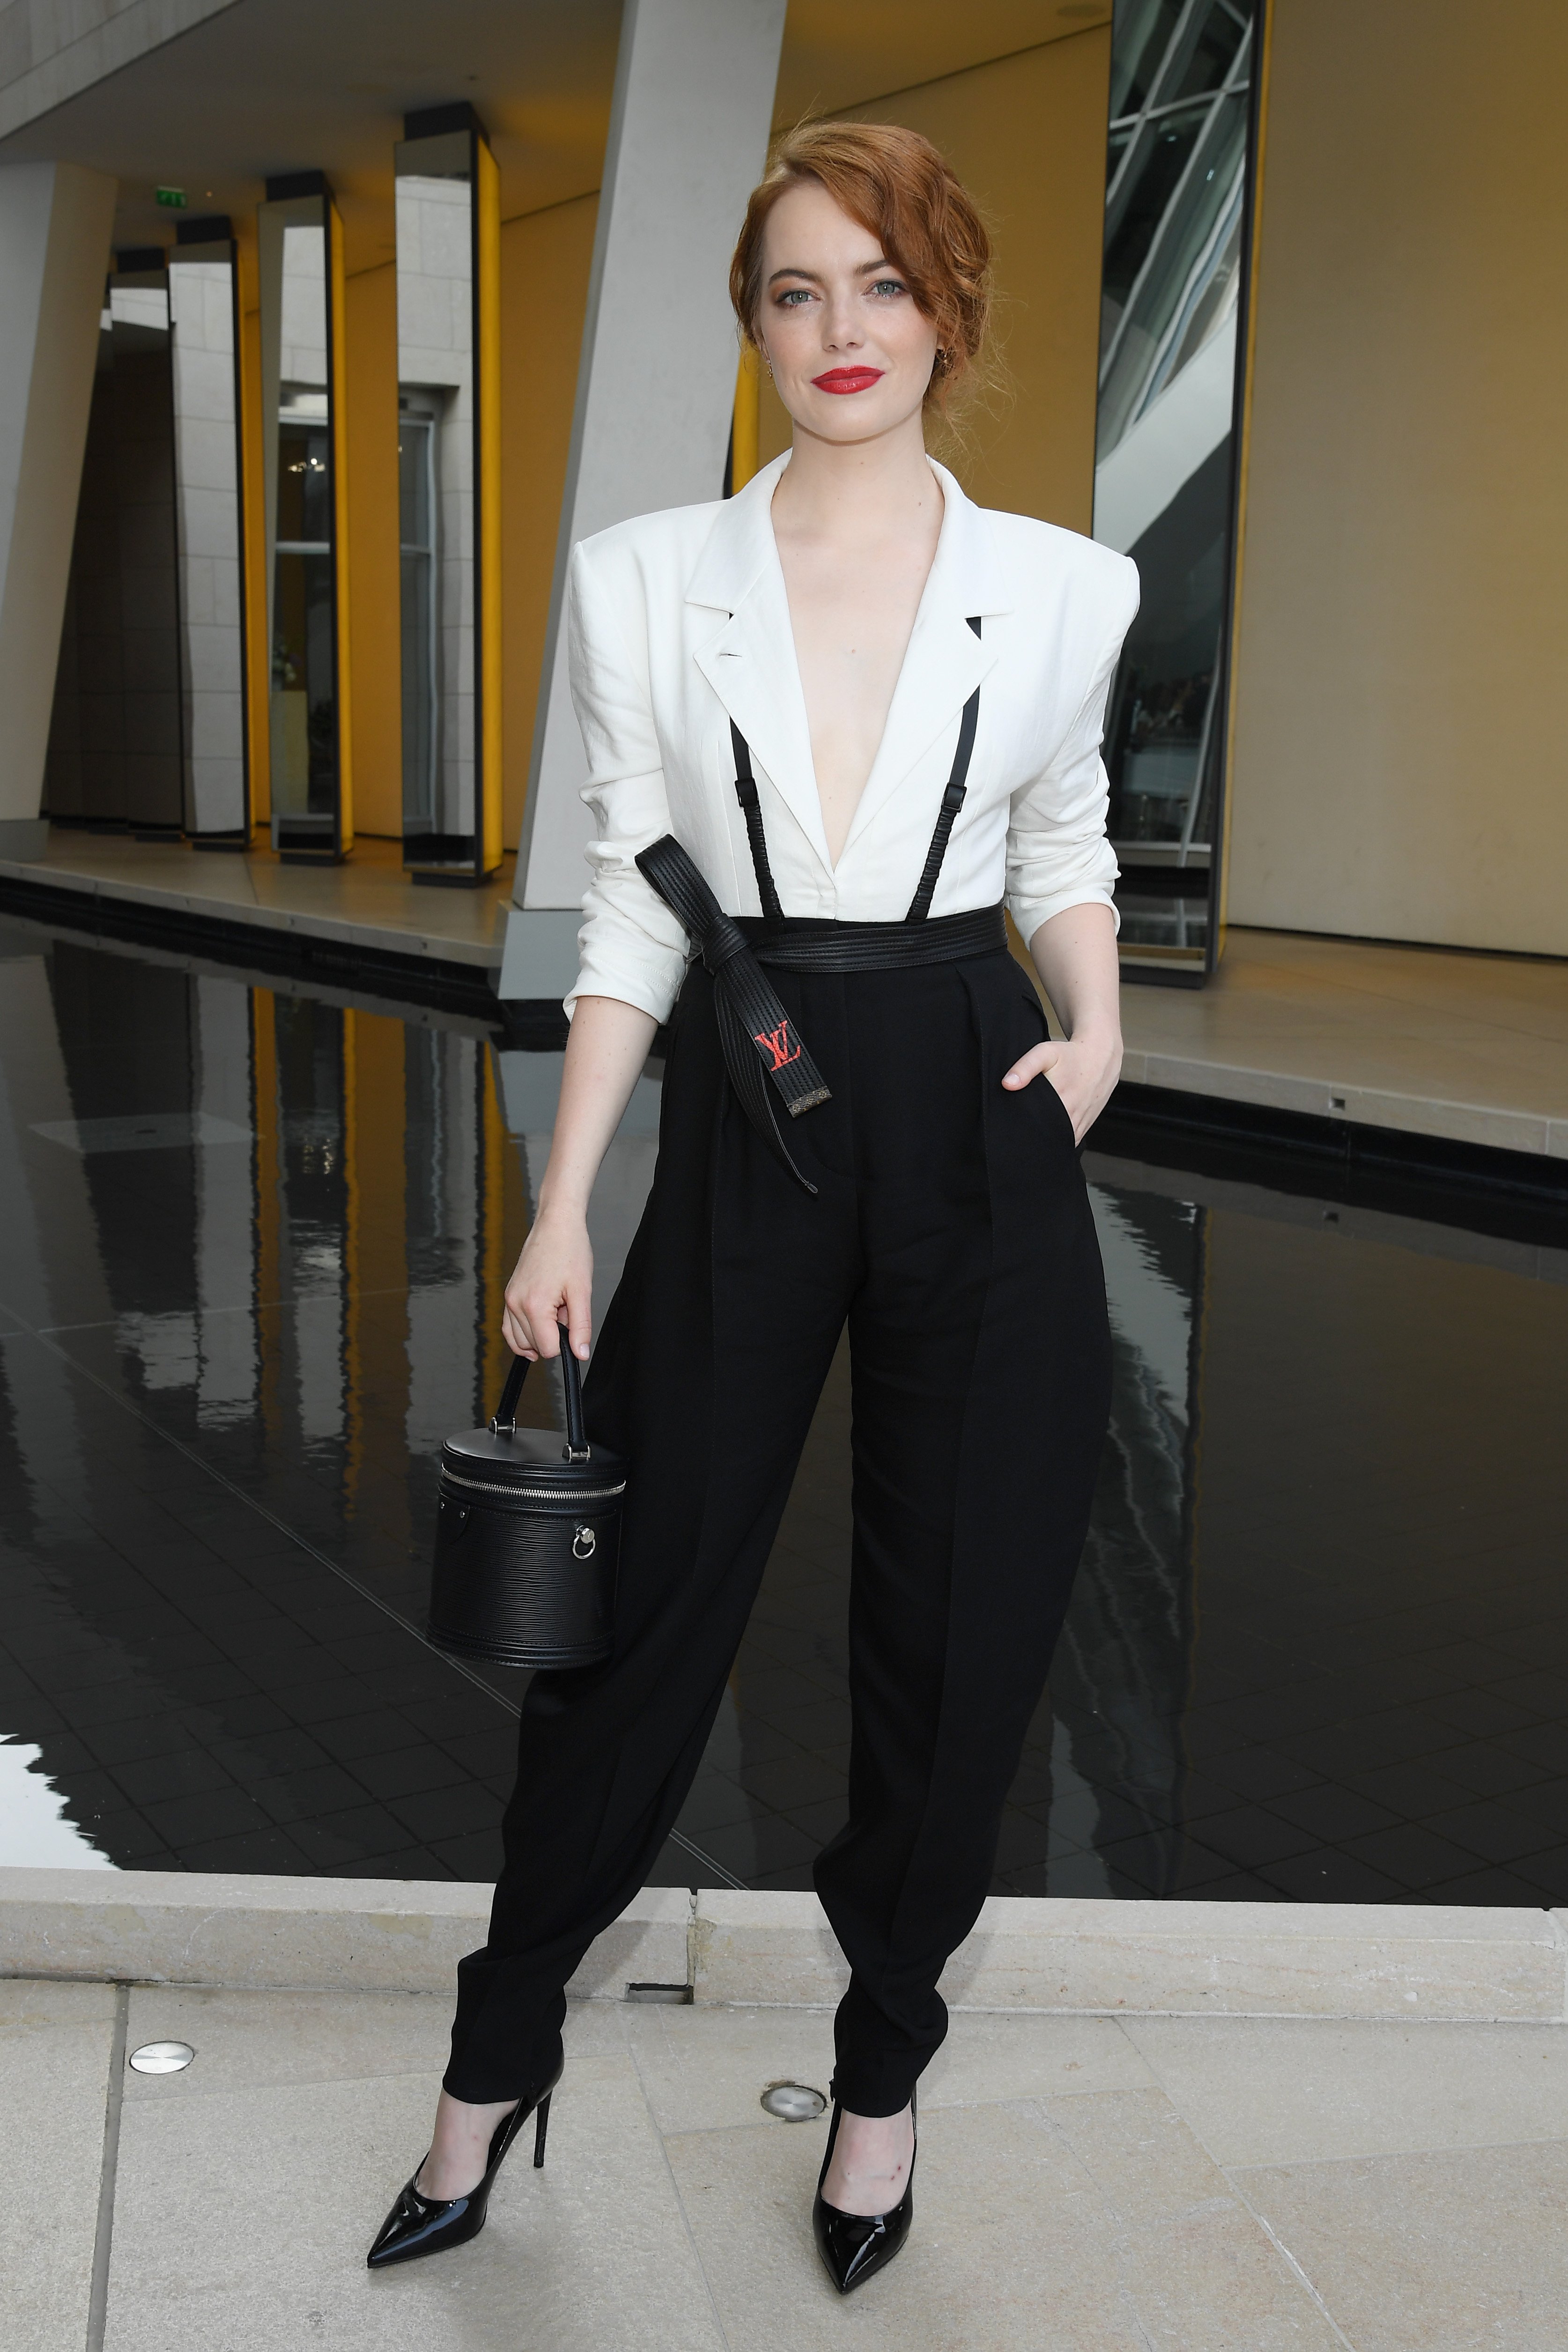 Emma Stone at the LVMH Prize 2018 Edition held in Fondation Louis Vuitton on June 6, 2018 in Paris, France. | Photo: Getty Images